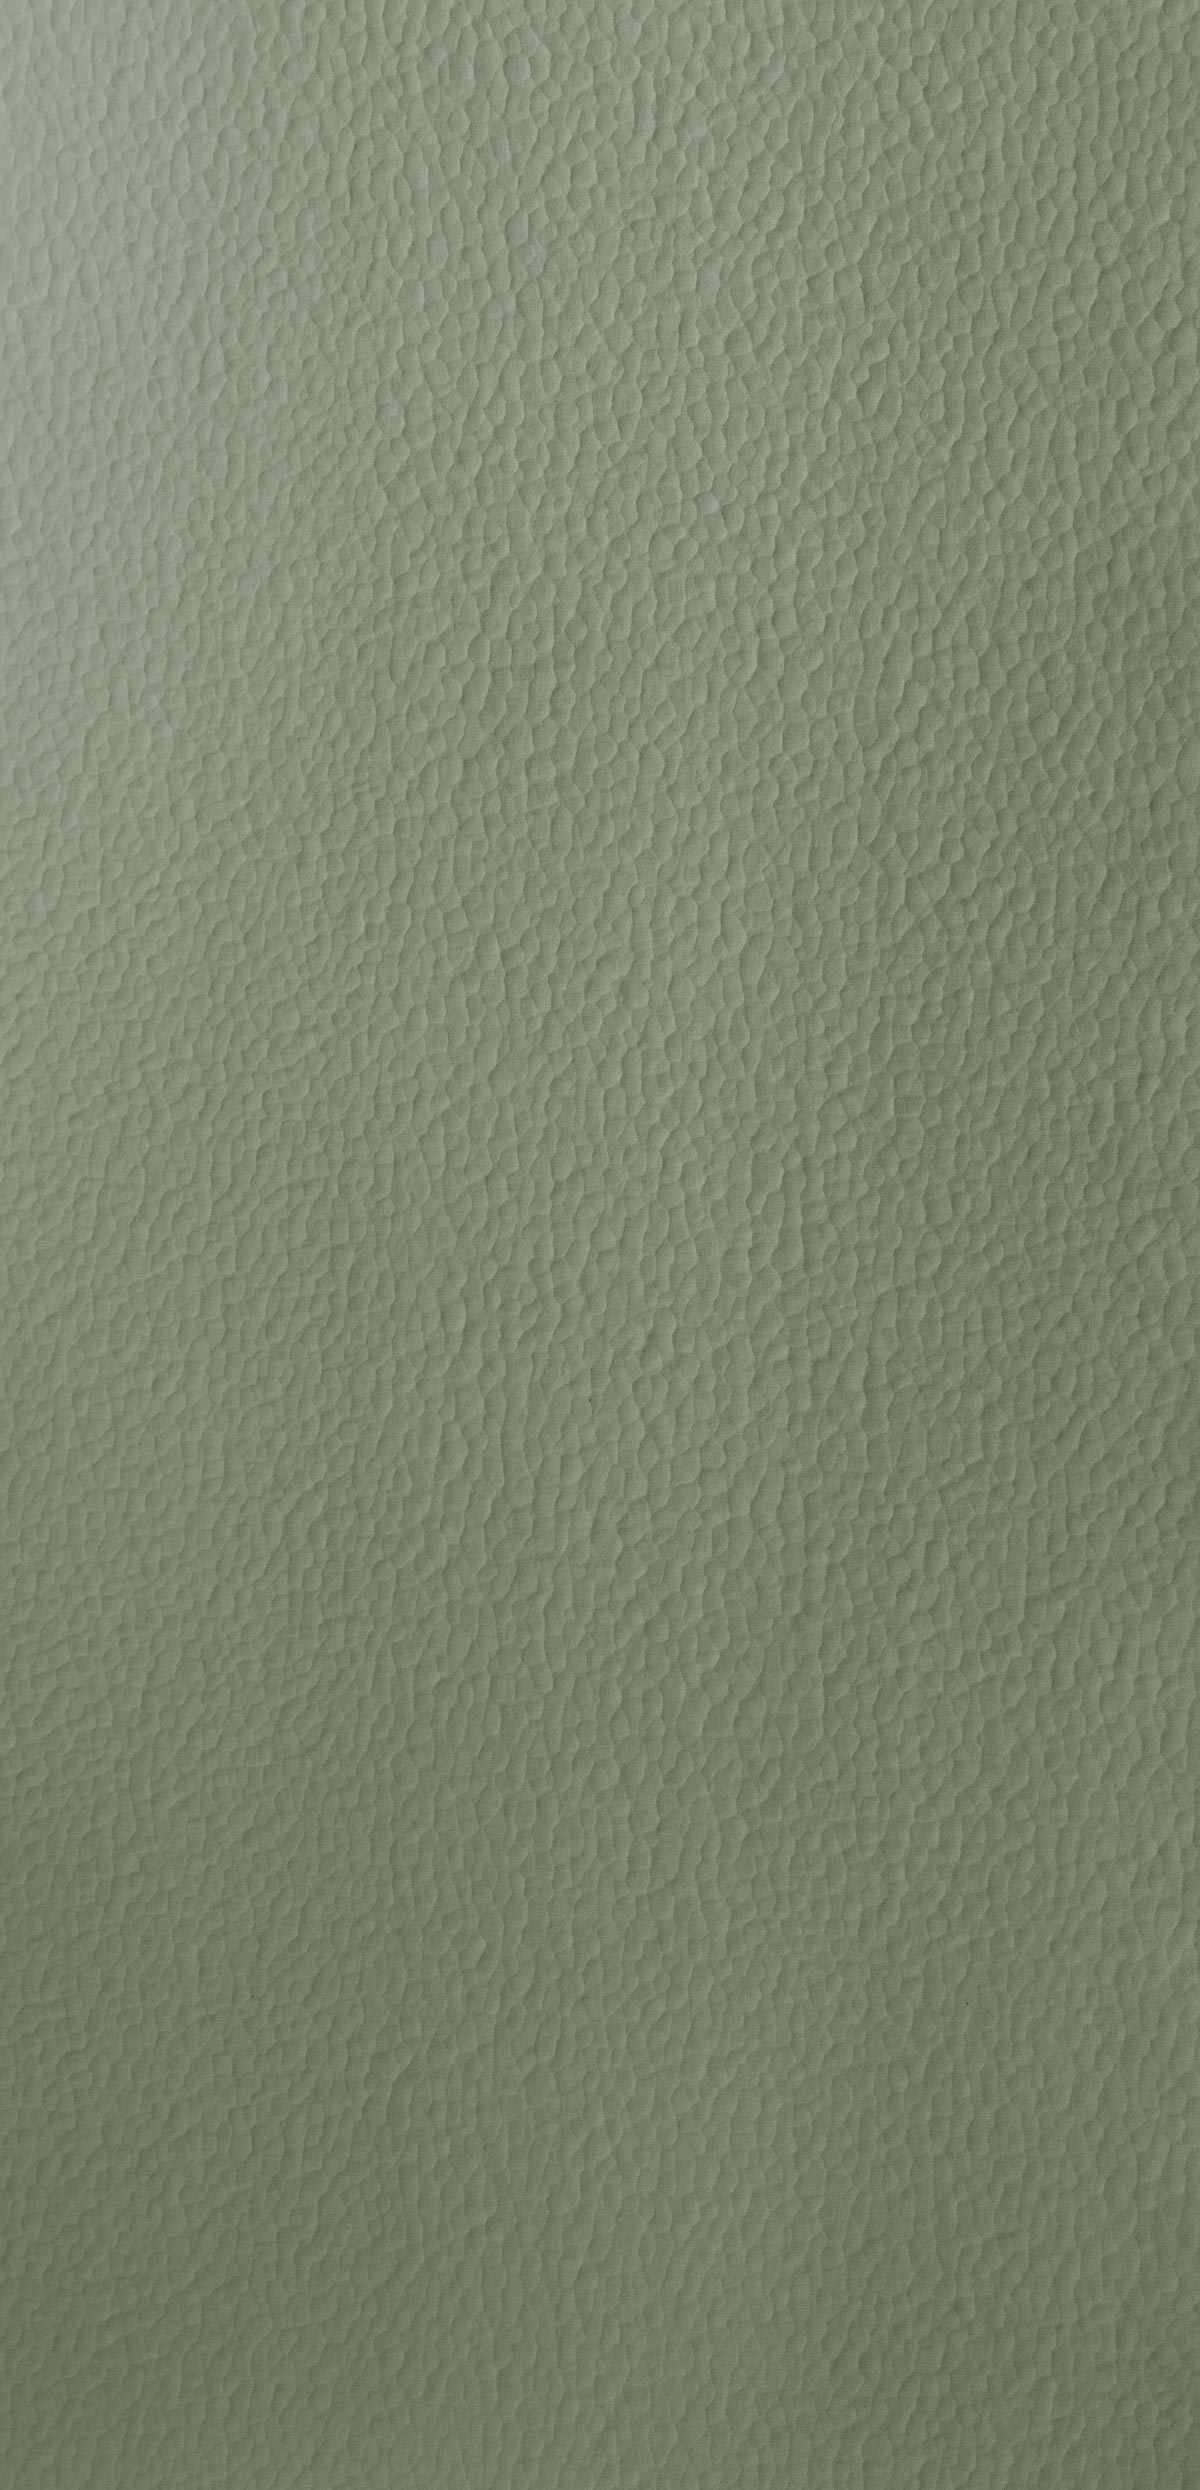 Hammered Pale green 018-panel